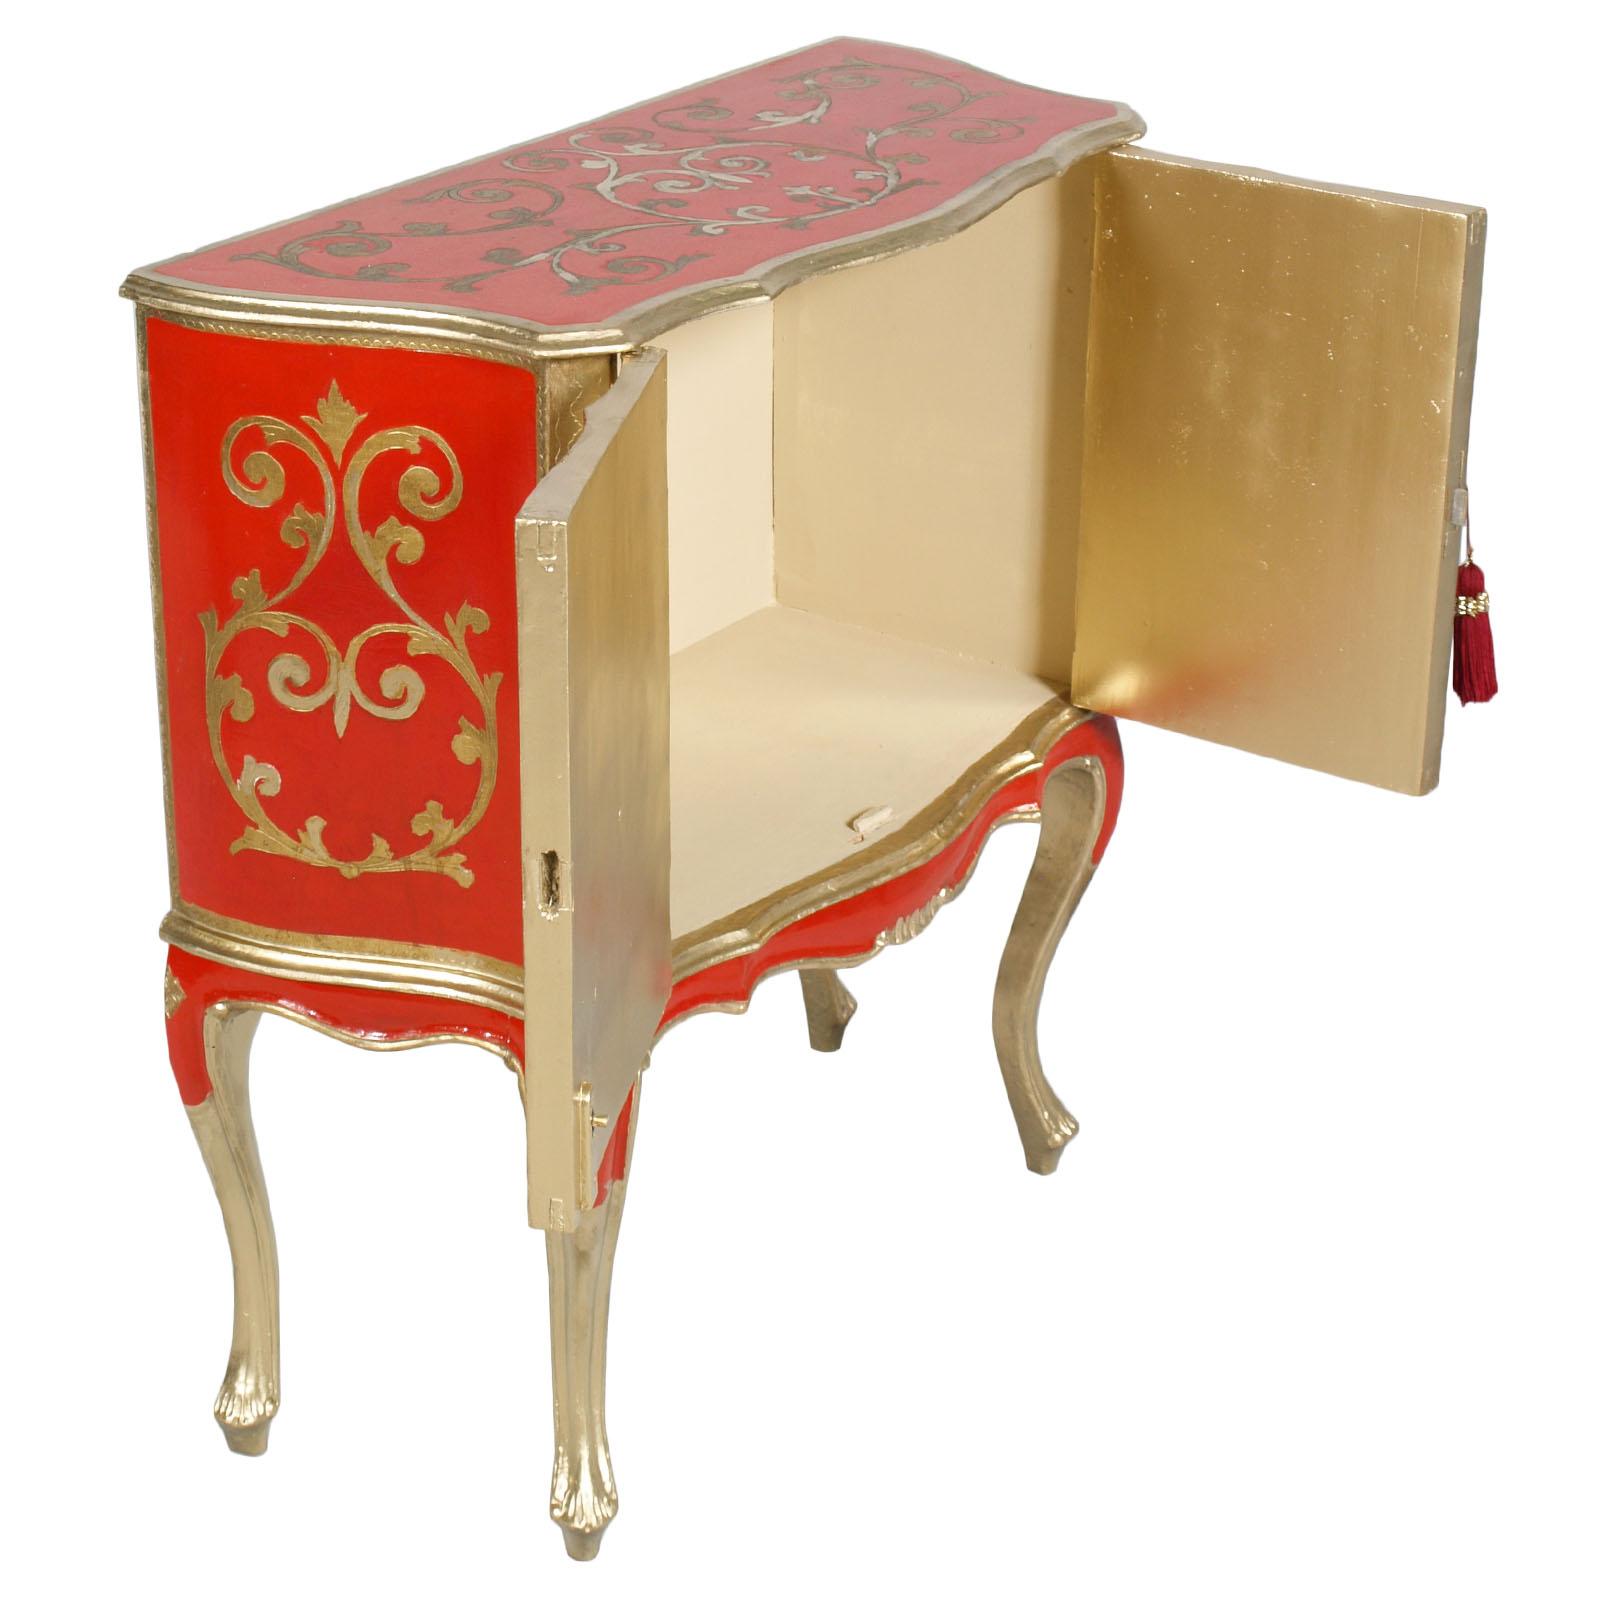 Carved Early 1900s Small Sideboard from Florence, Gold Leaf and Florentine Red Lacquer For Sale